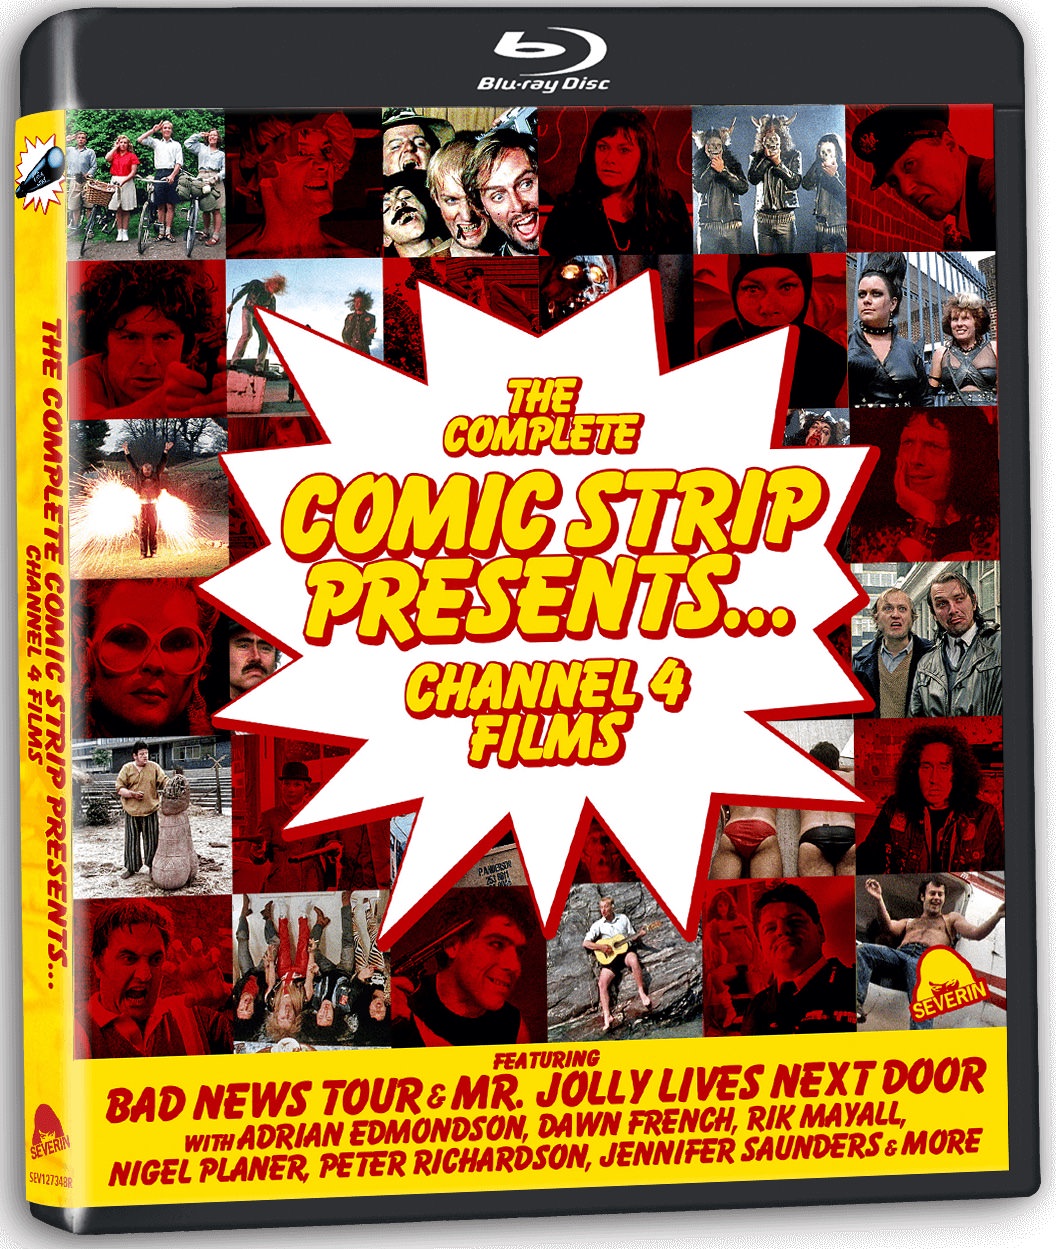 The Complete Comic Strip Presents…Channel 4 Films [3-Disc Blu-ray w/Exclusive Slipcover] (North America Only)